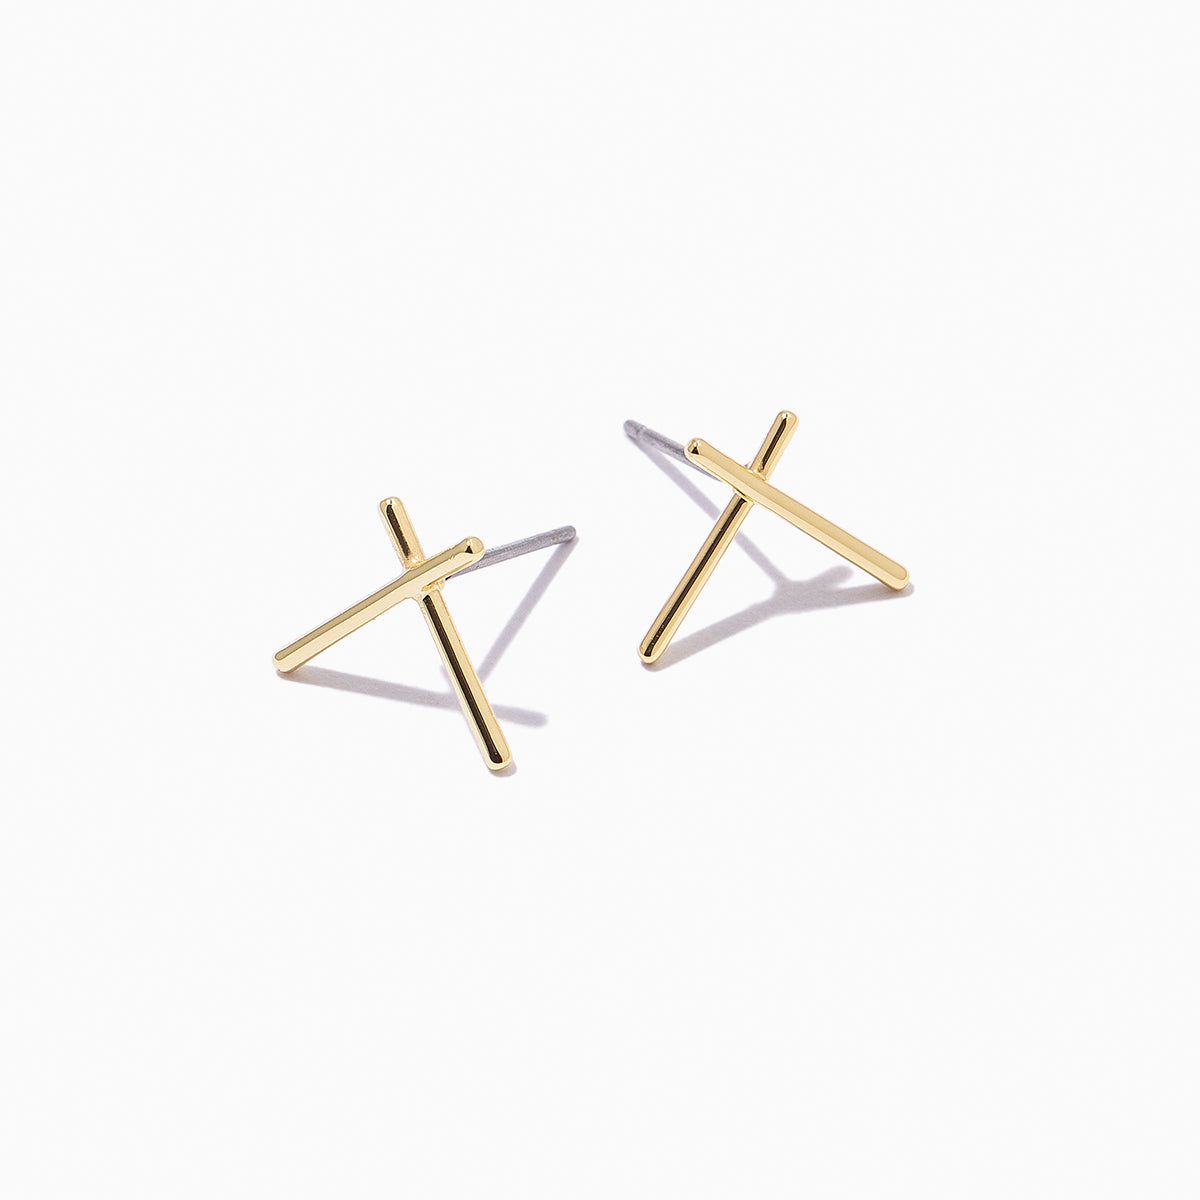 Criss Cross Earrings | Gold | Product Detail Image | Uncommon James